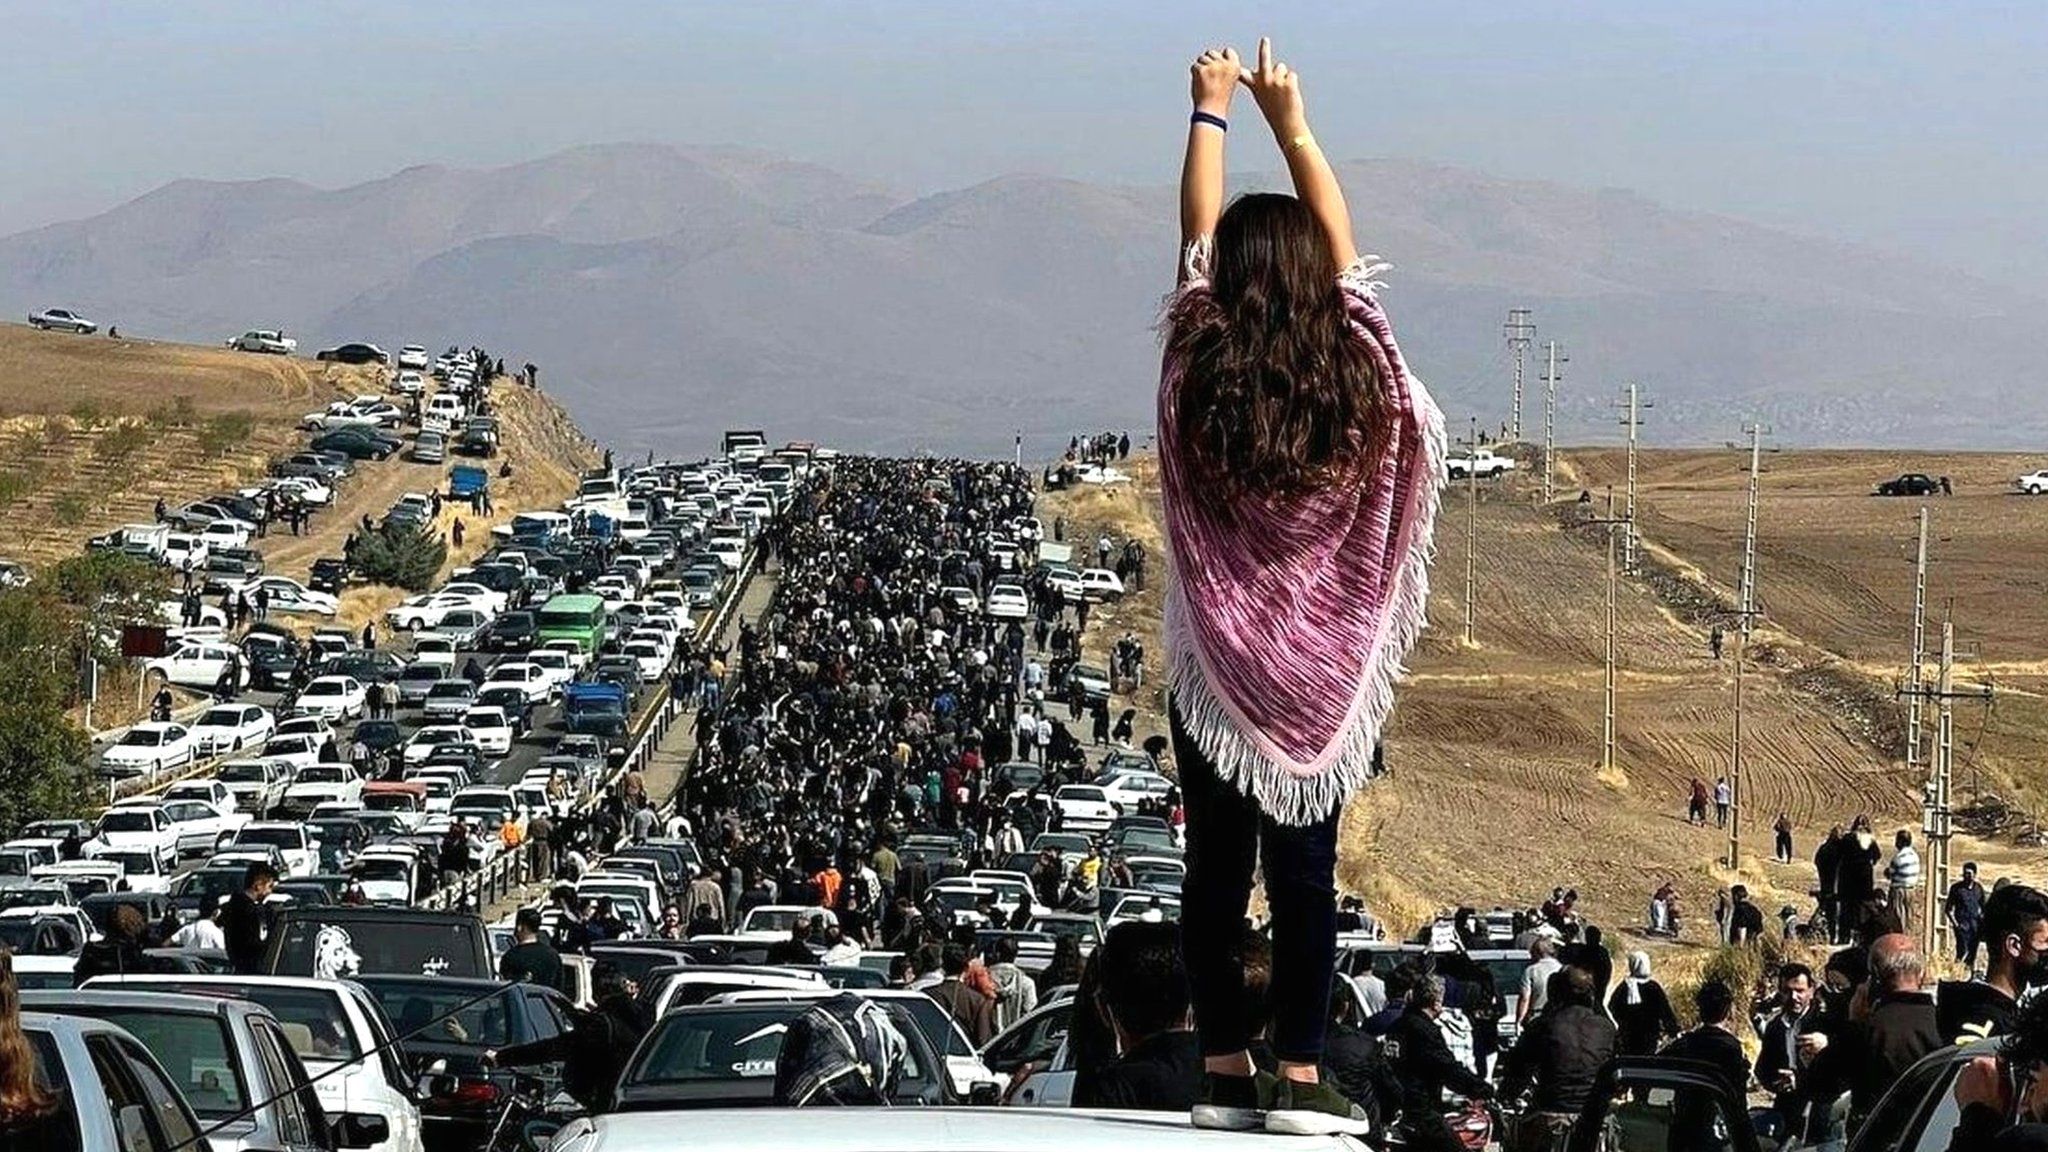 A young woman without a hijab stands on a car as a huge crowd walks towards the Aichi cemetery in Saqqez, Iran, to visit Mahsa Amini's grave on 26 October 2022